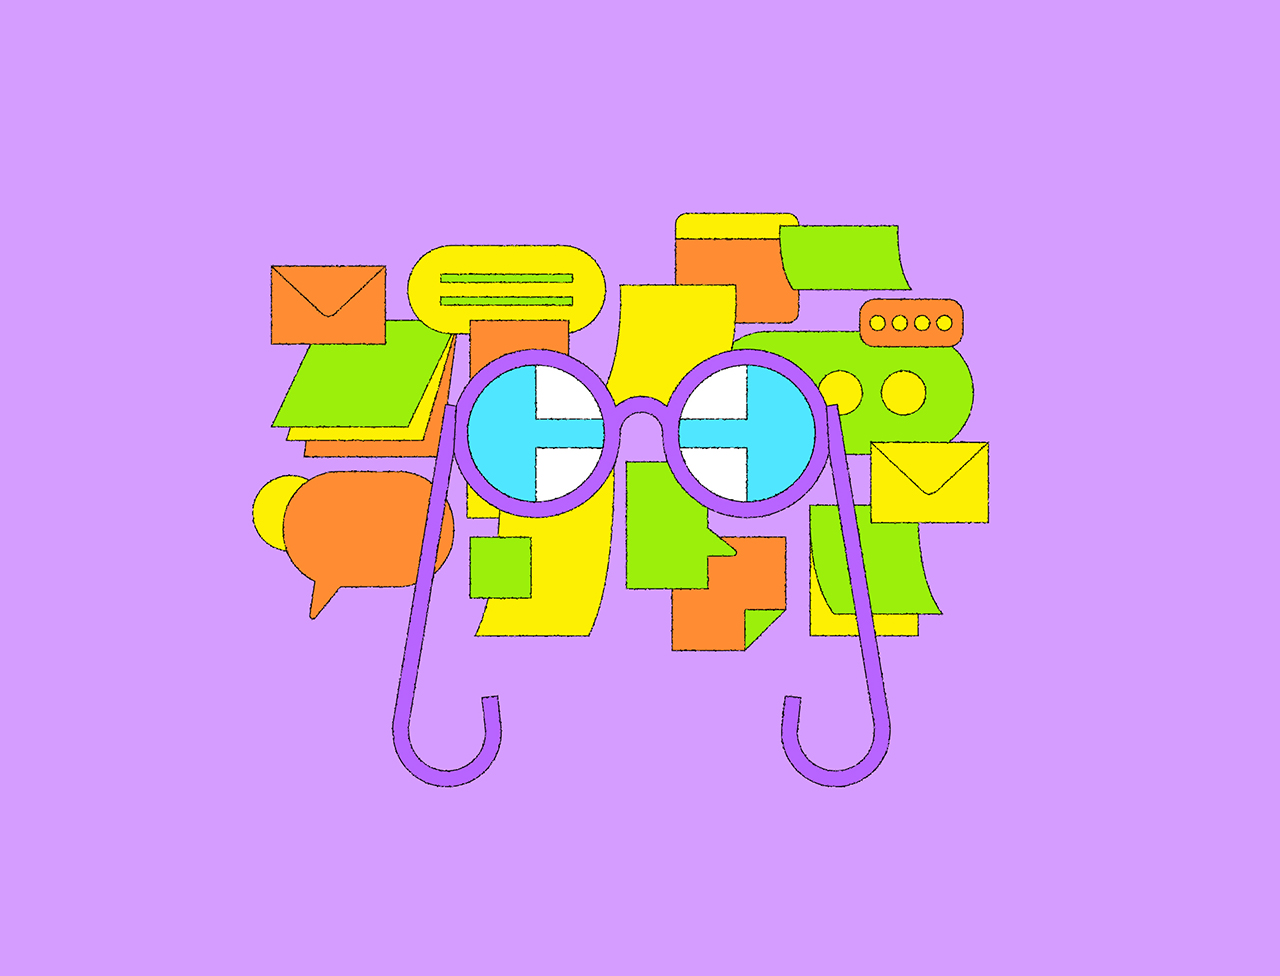 An illustration of an array of work-related icons—chat windows, speech ballons, emails. In the center are a pair of spectacles, and through the lenses of the spectacles we see a clarified image of simple shapes.